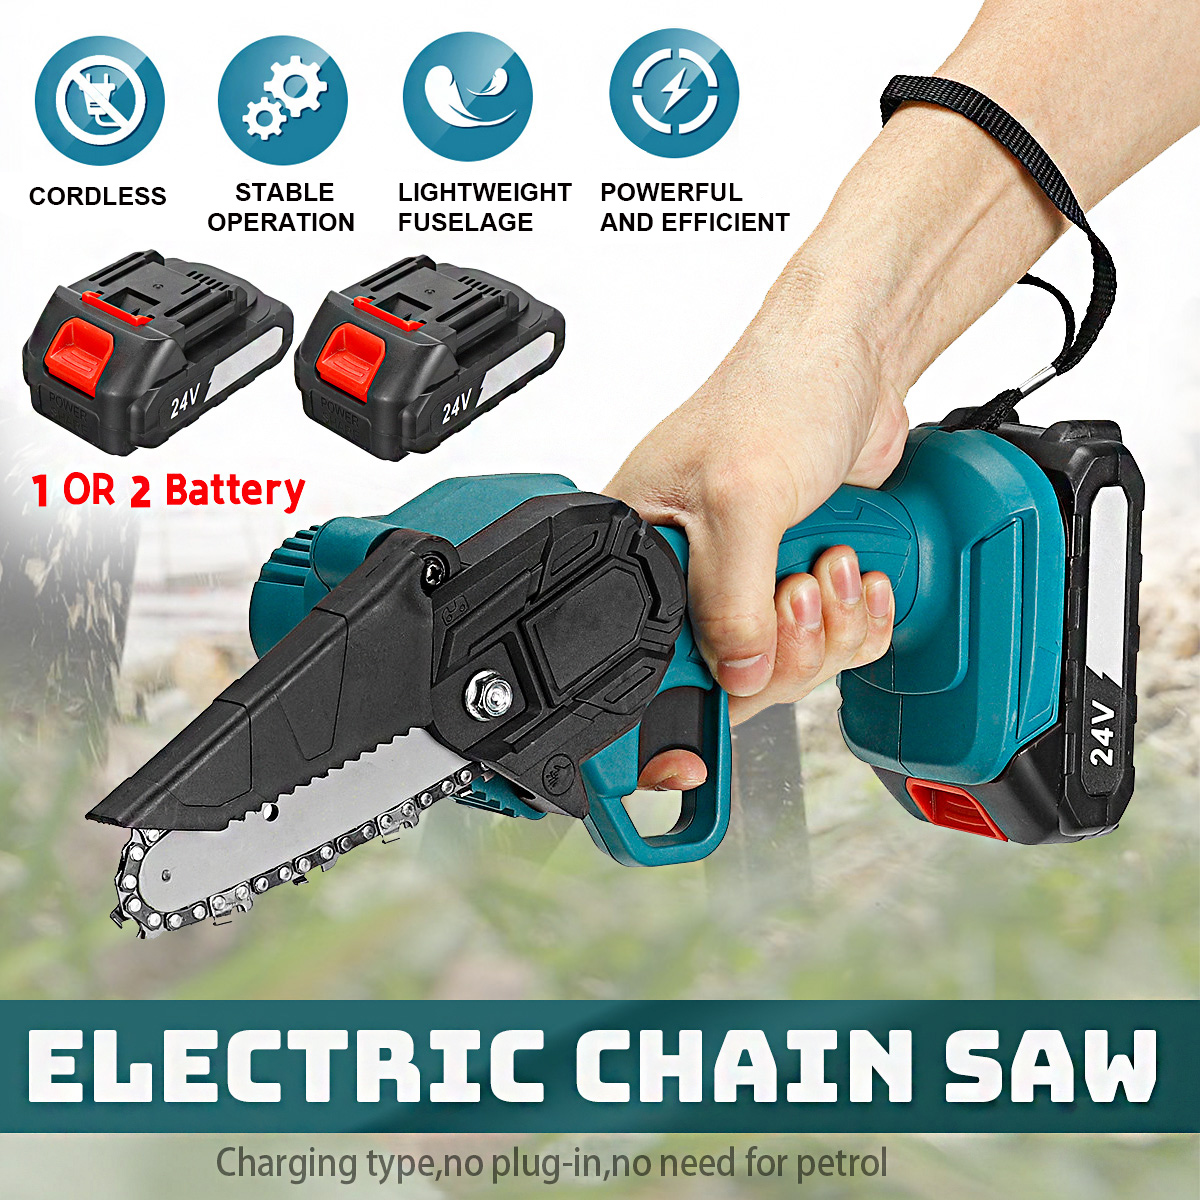 4-Inch-Electric-Chainsaws-Rechargeable-Portable-Chain-Saw-Woodworking-Tool-Wood-Cutter-W-12-Battery-1860314-2